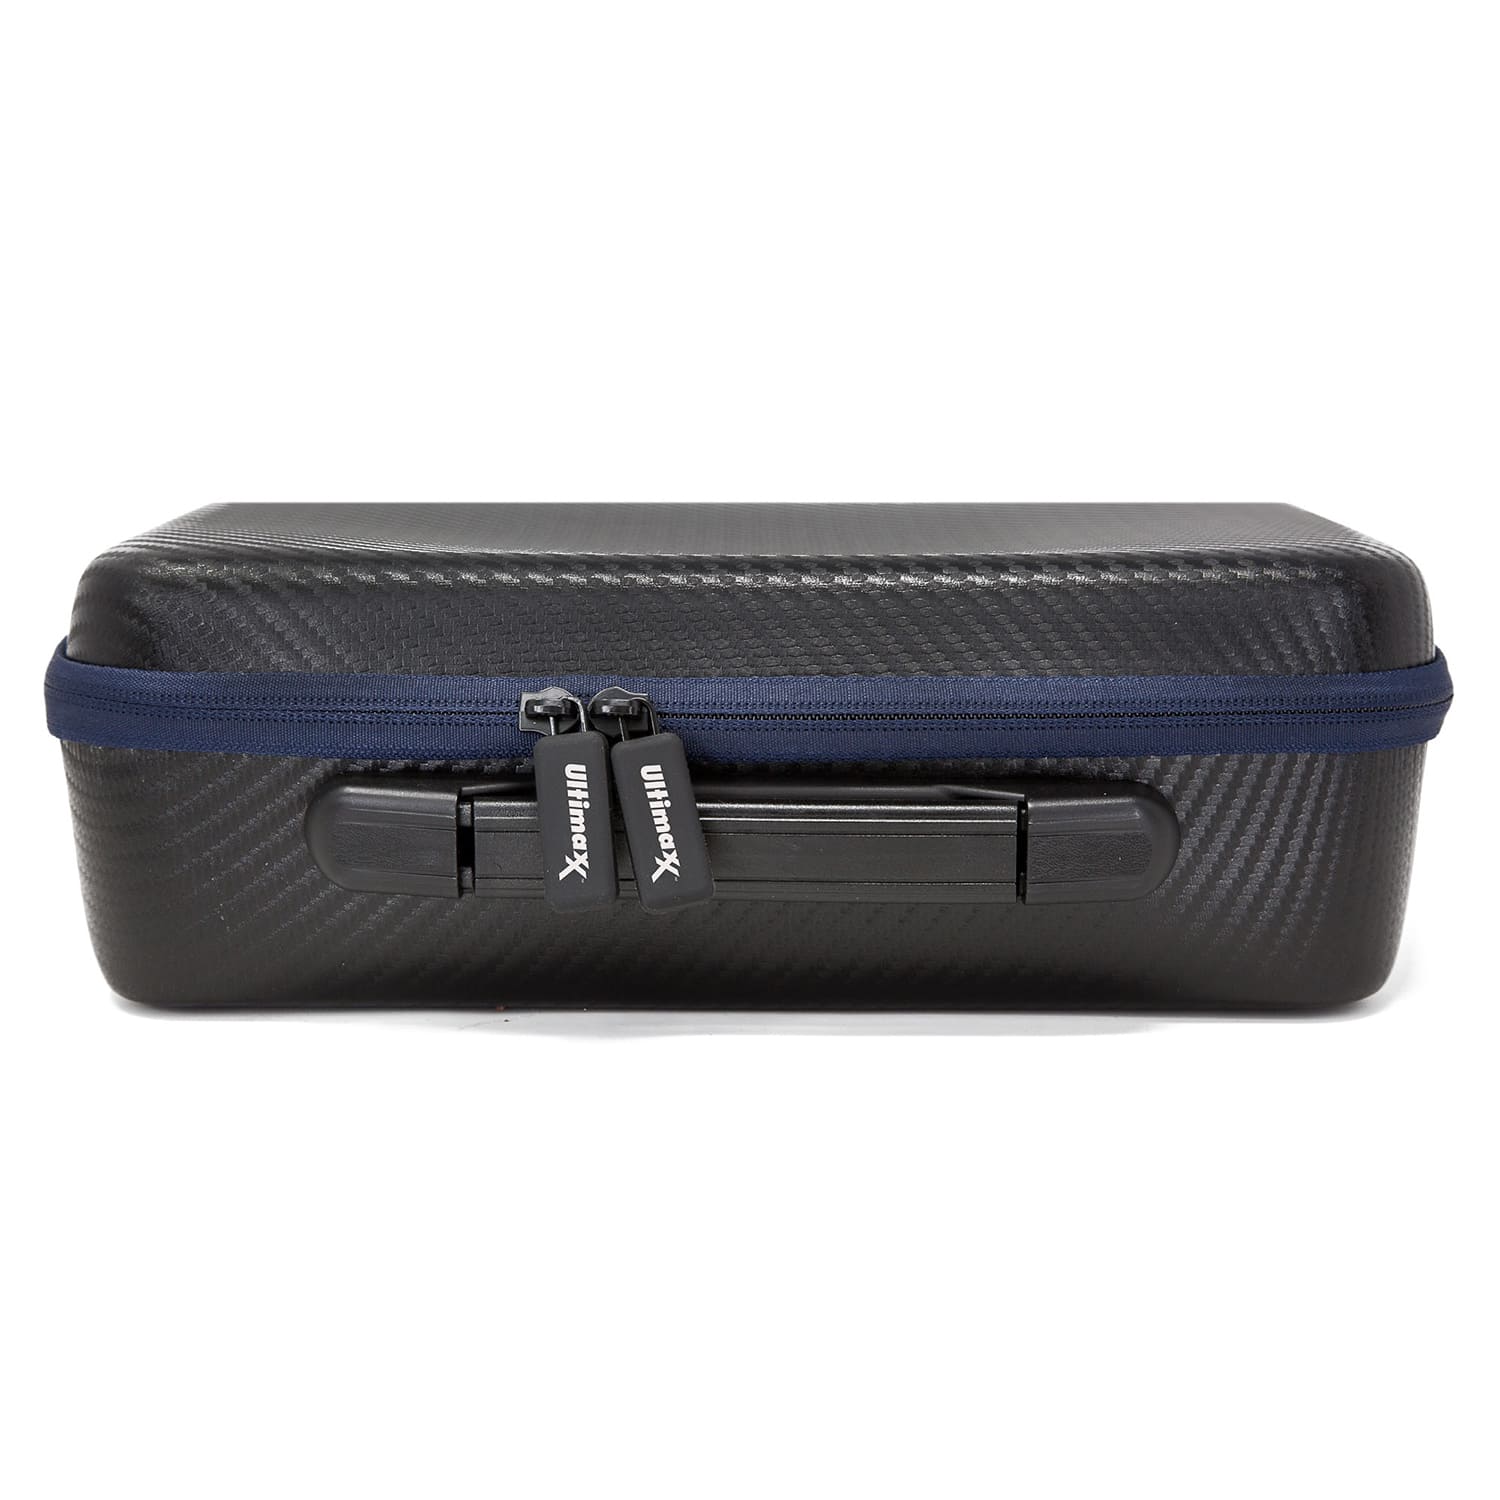 Carry Case for Spark